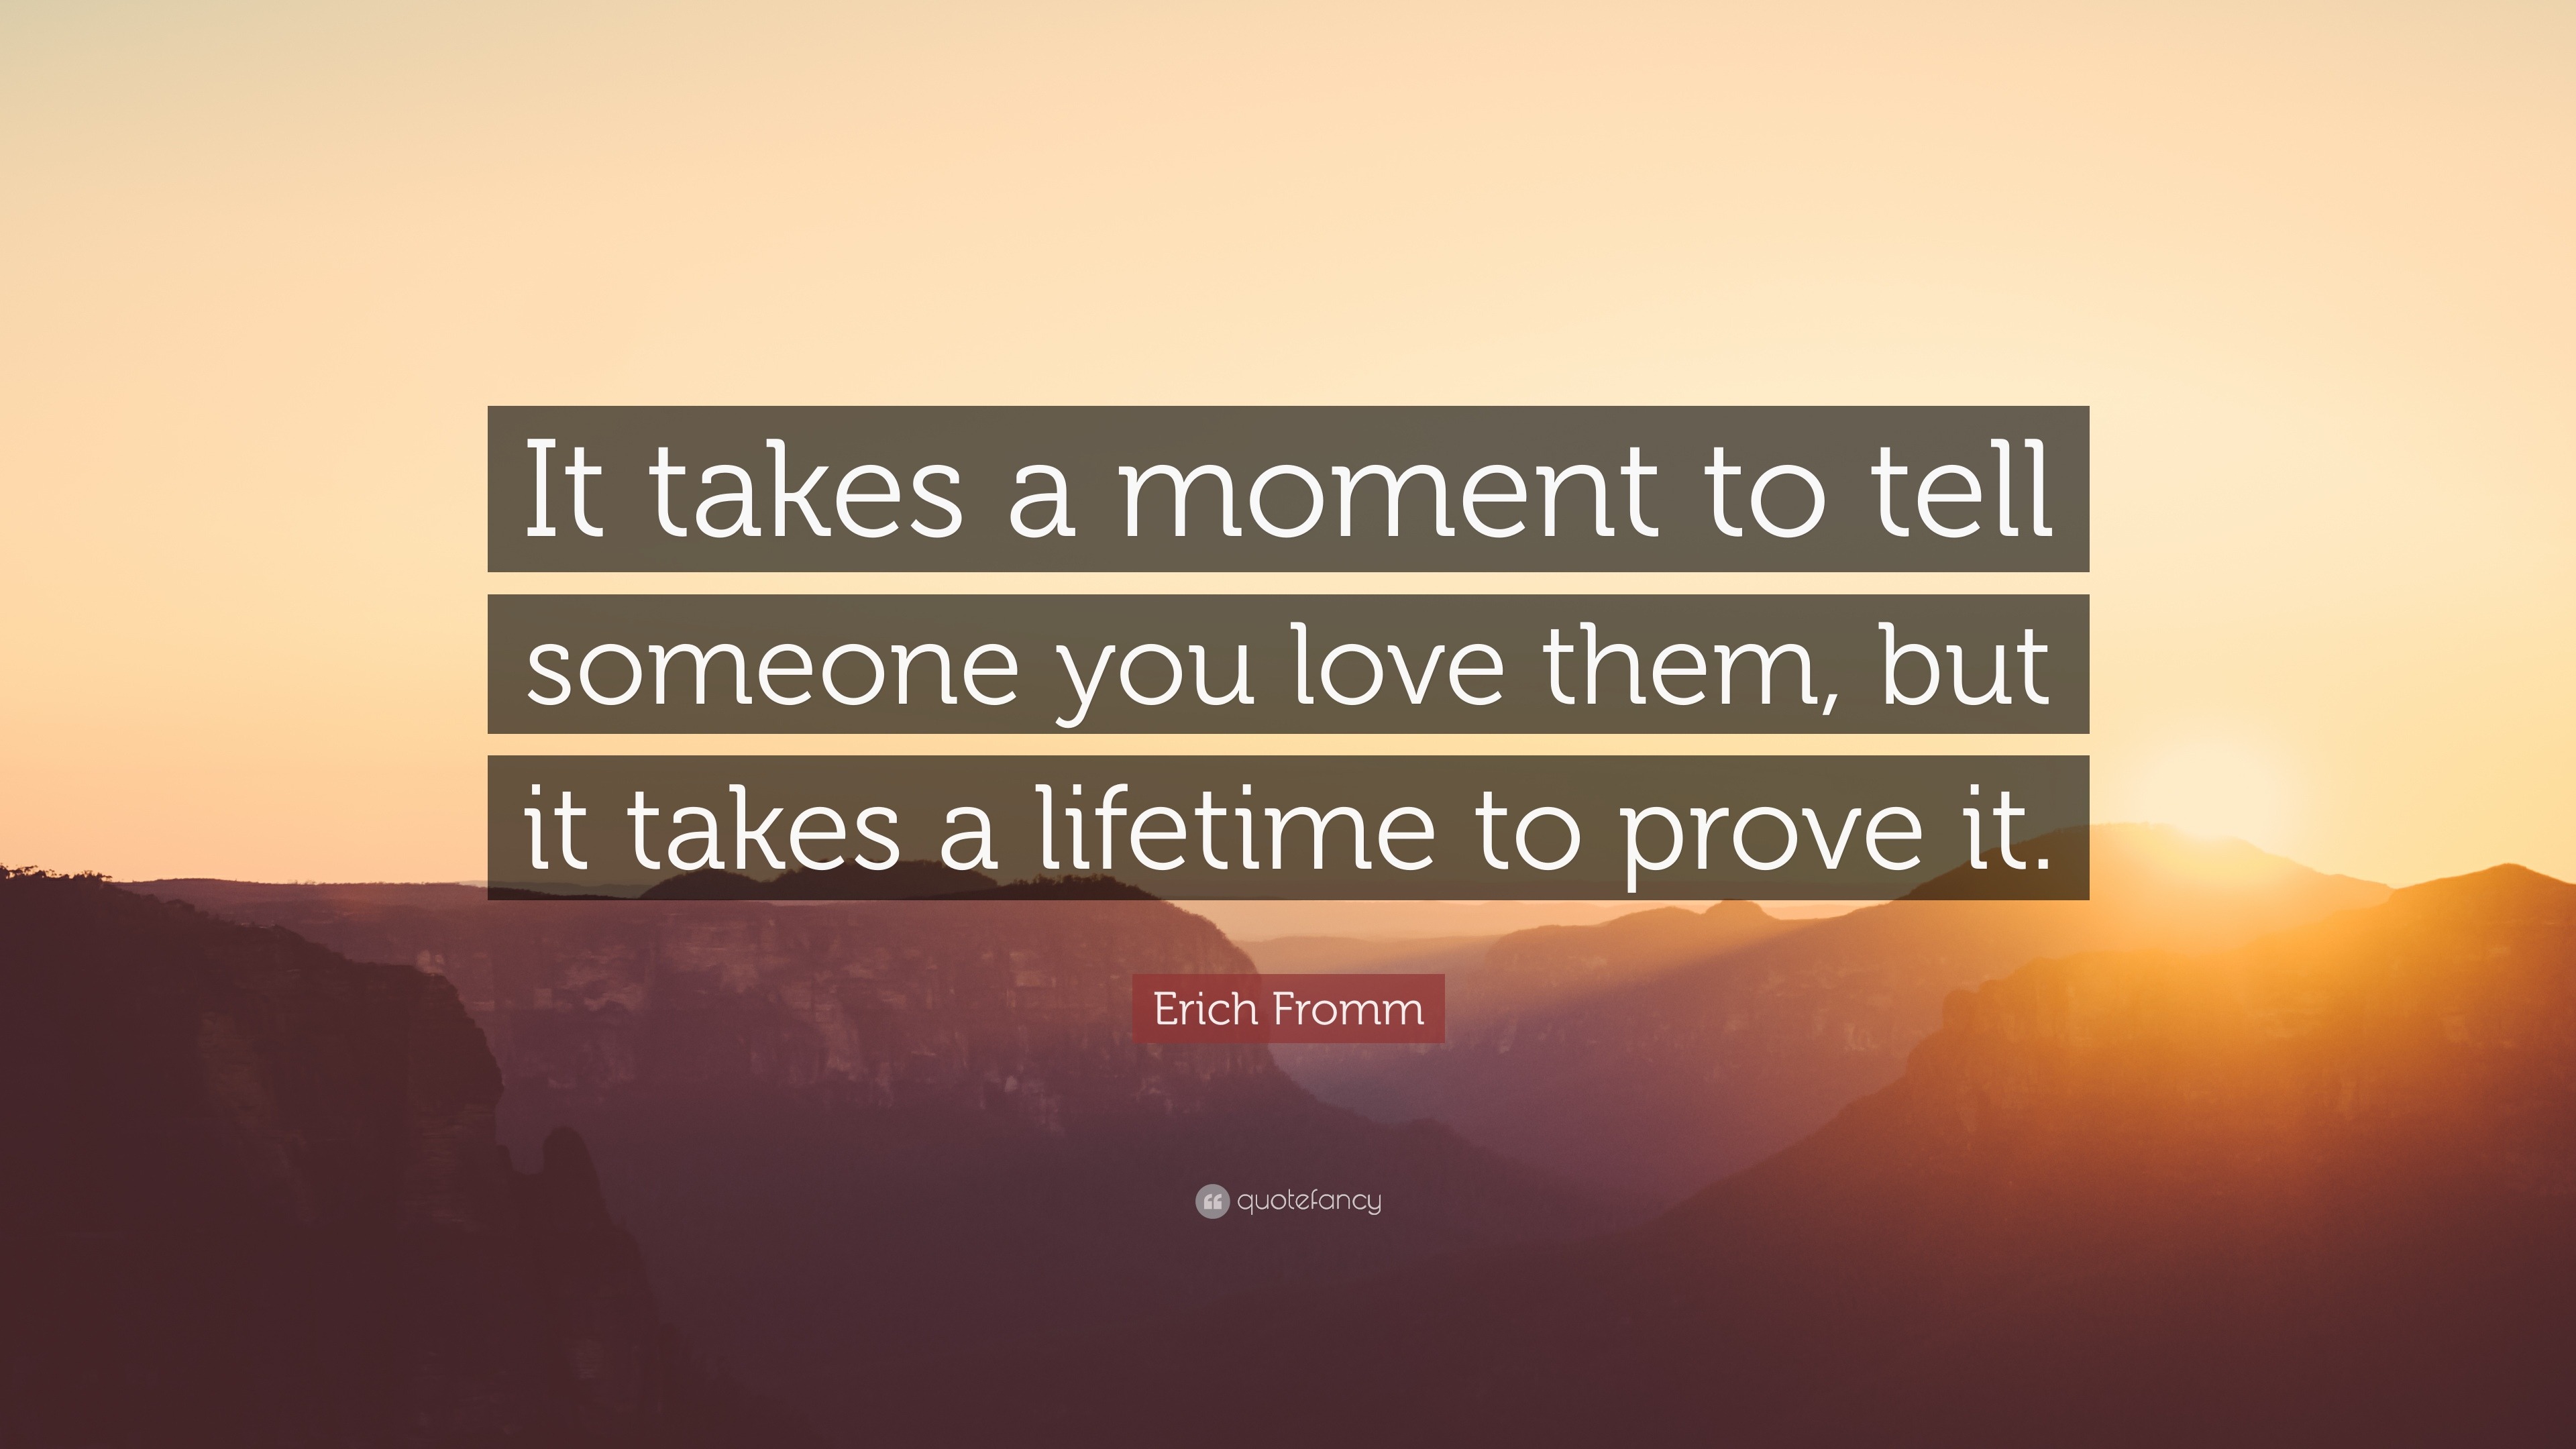 Erich Fromm Quote: “It takes a moment to tell someone you love them ...